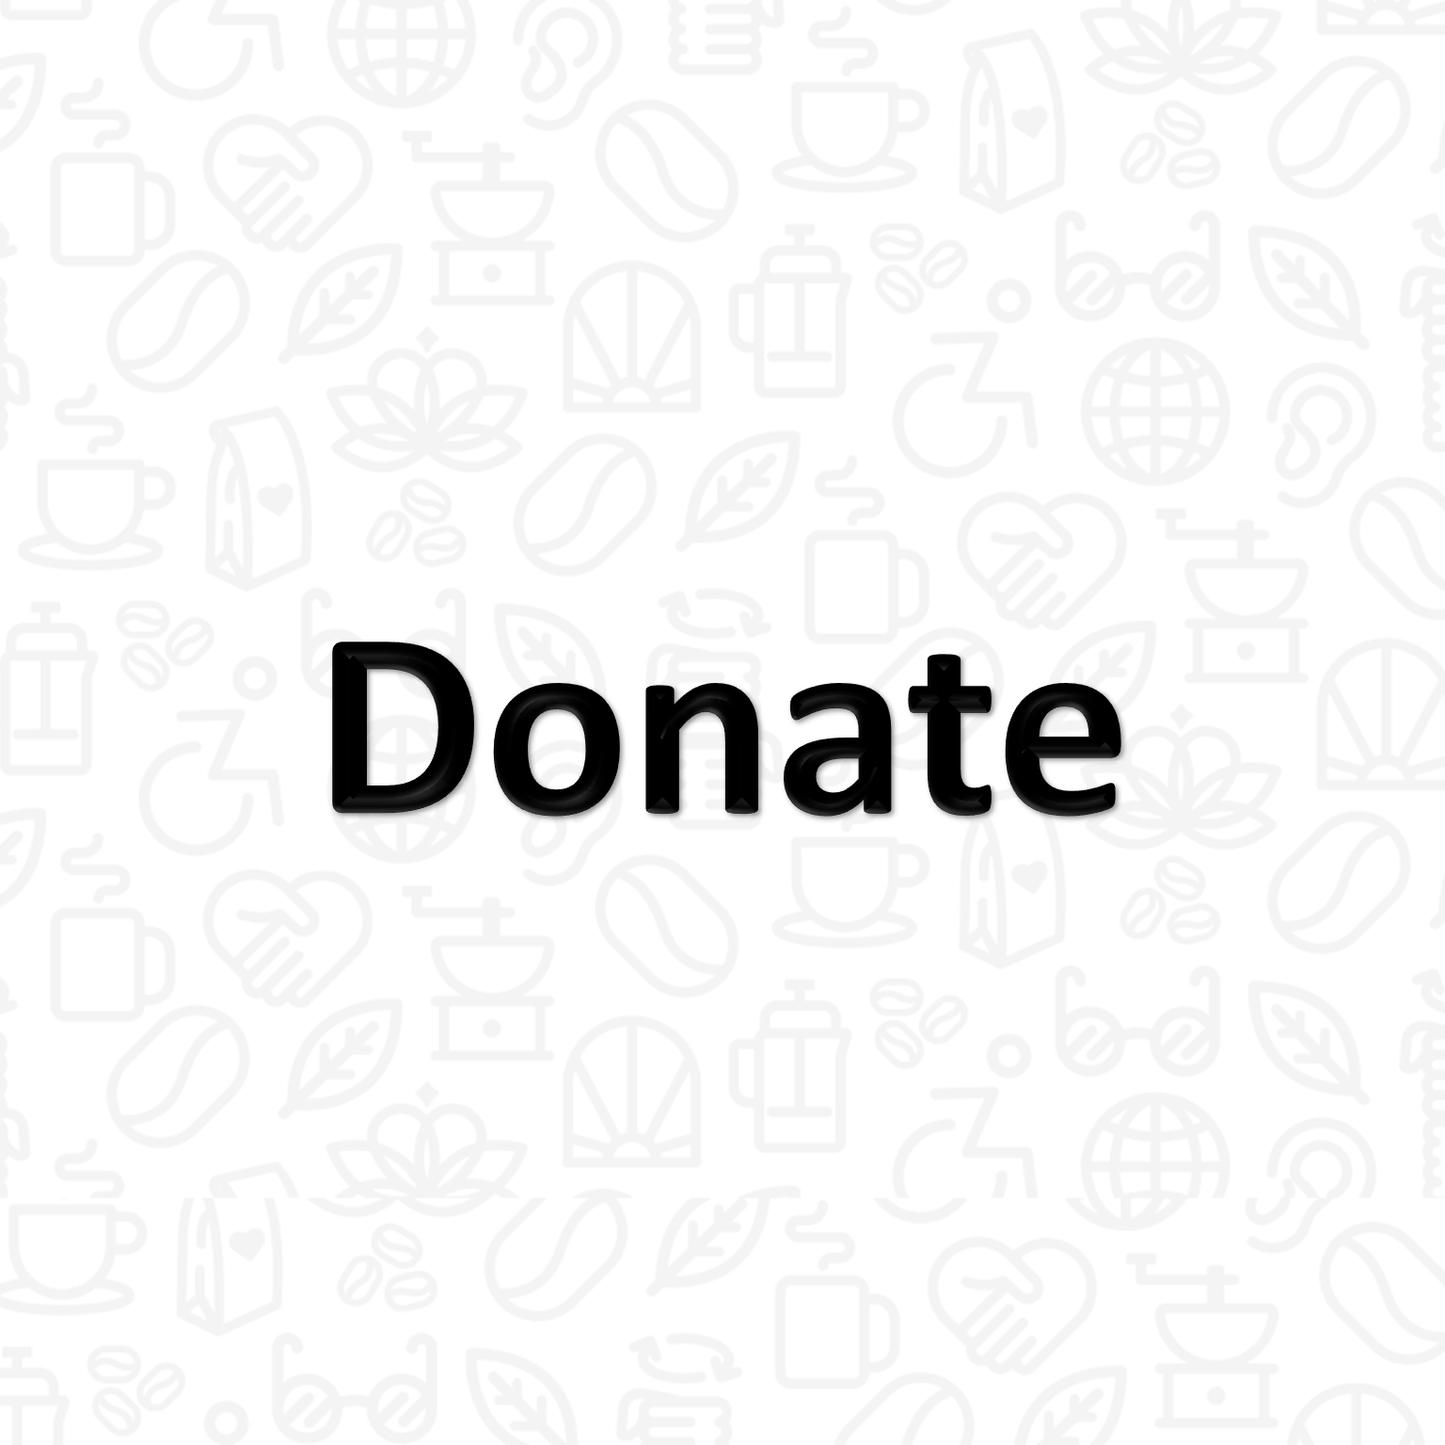 The word "Donate" on a background covered with coffee and disability icons in line art